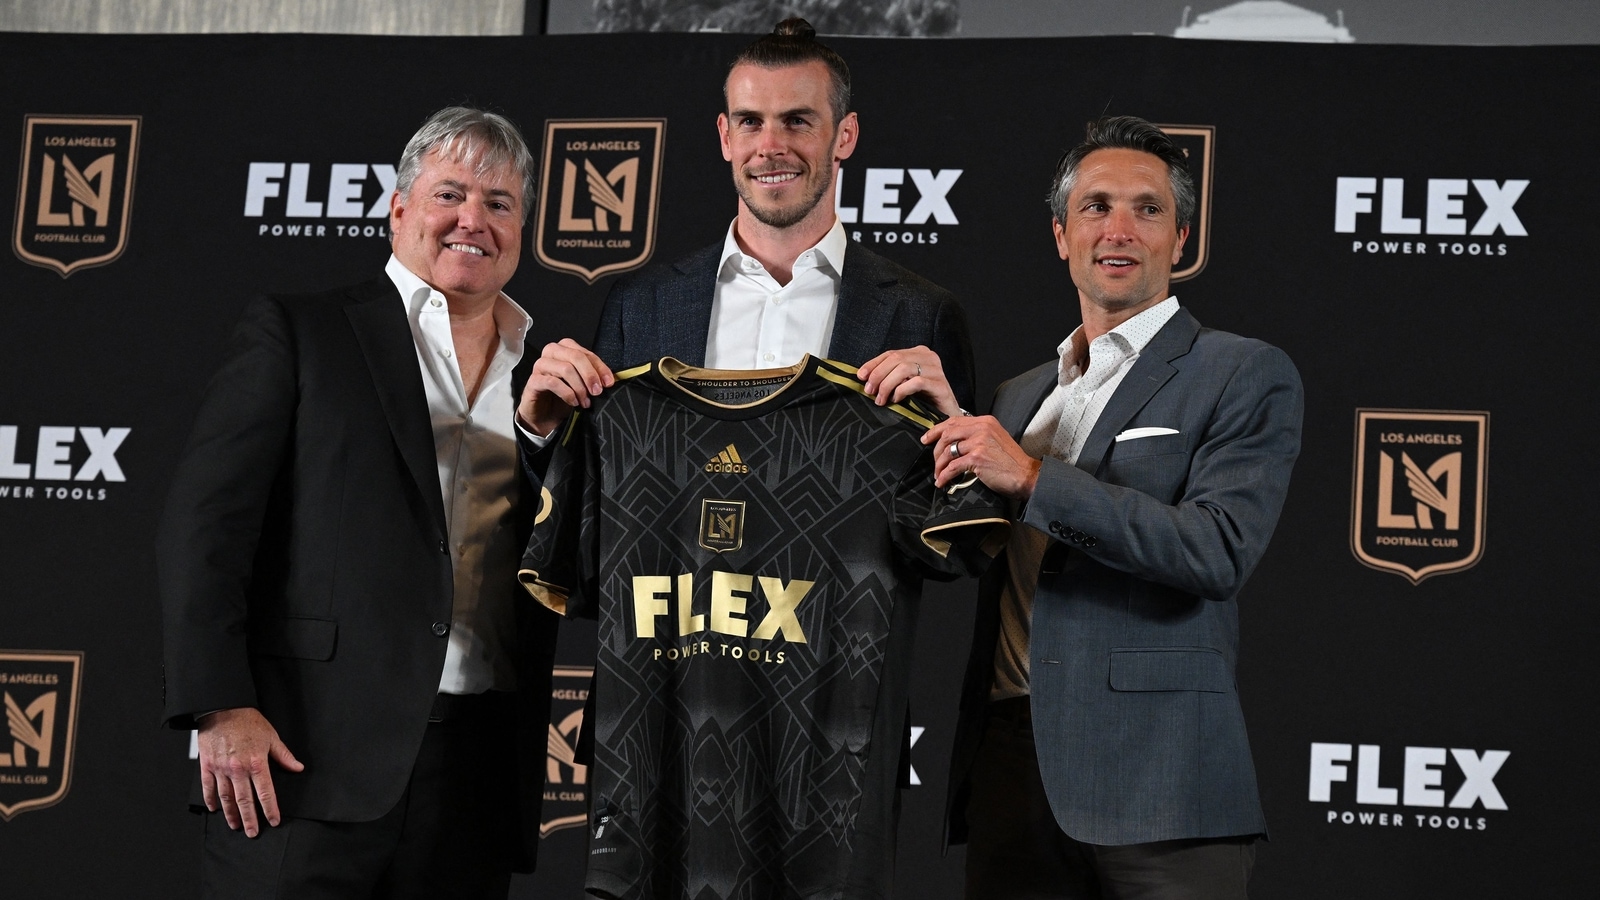 gareth-bale-says-he-s-at-lafc-to-win-trophies-not-to-retire